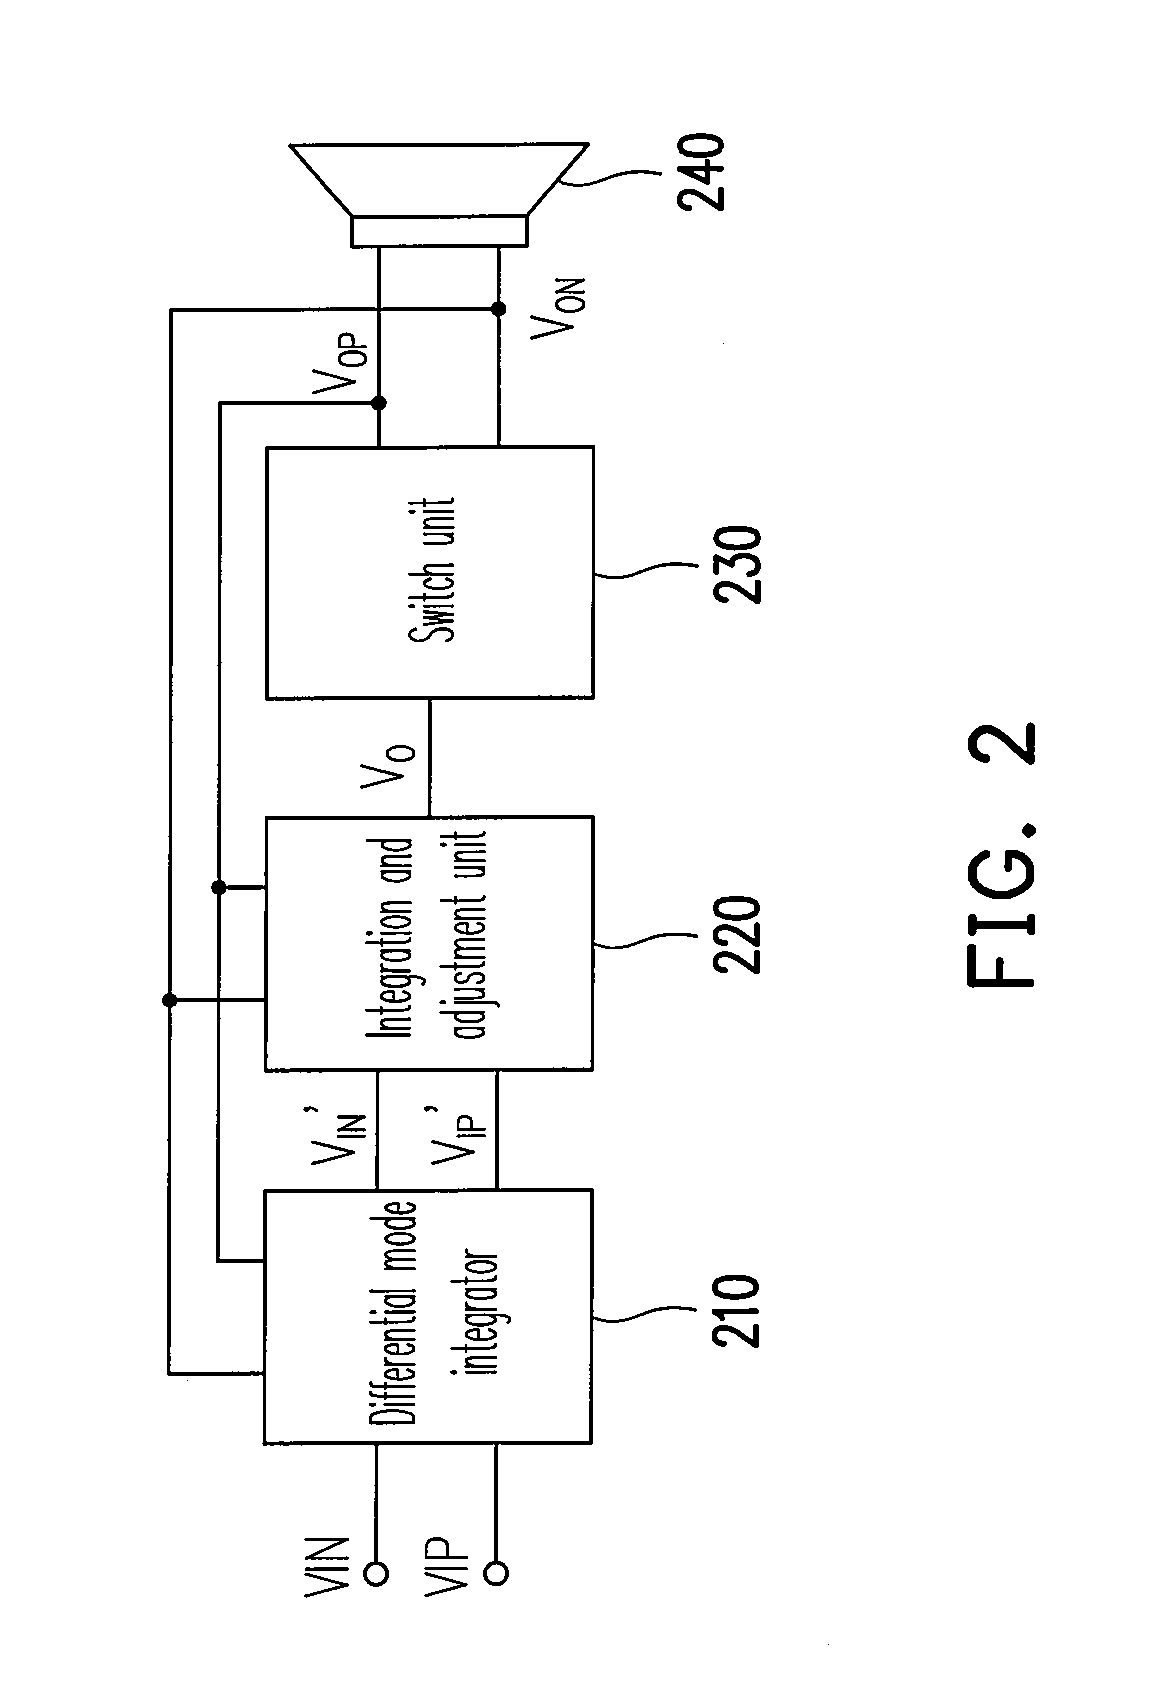 Power amplifier with noise shaping function